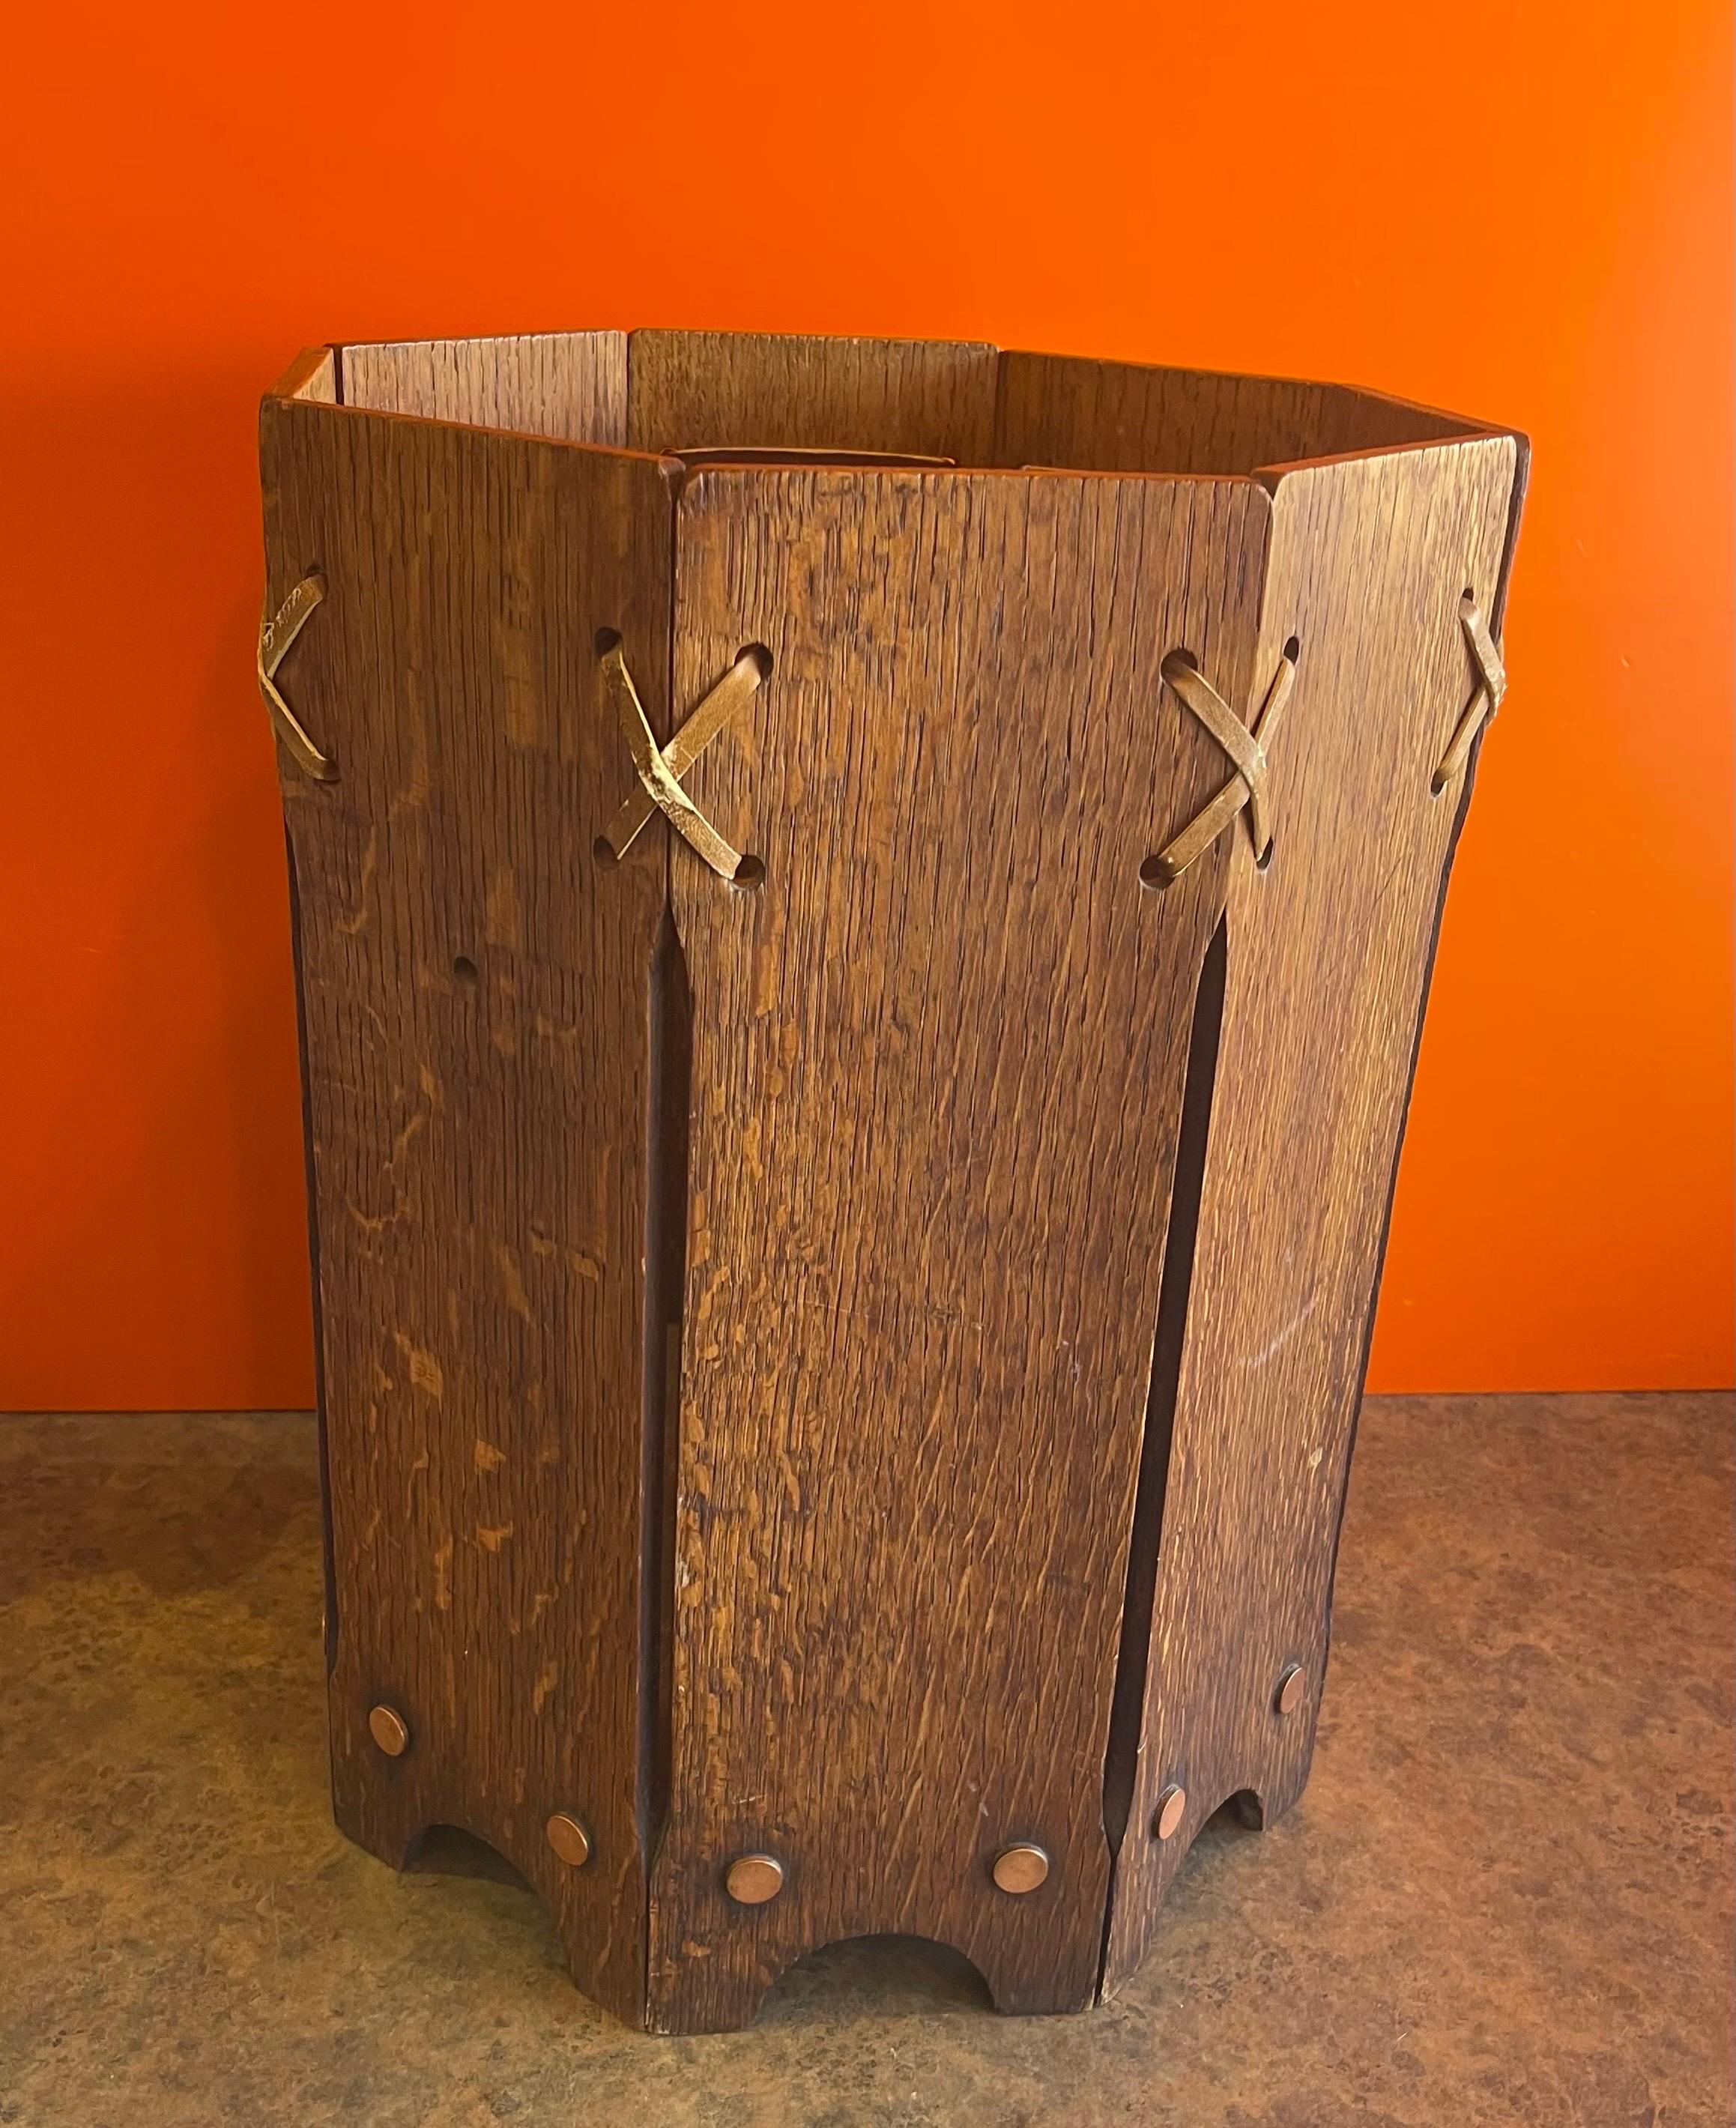 A very well constructed mission / craftsman style American quarter sawn oak waste basket, circa 1940s. The waste basket is in good condition and measures 11.5